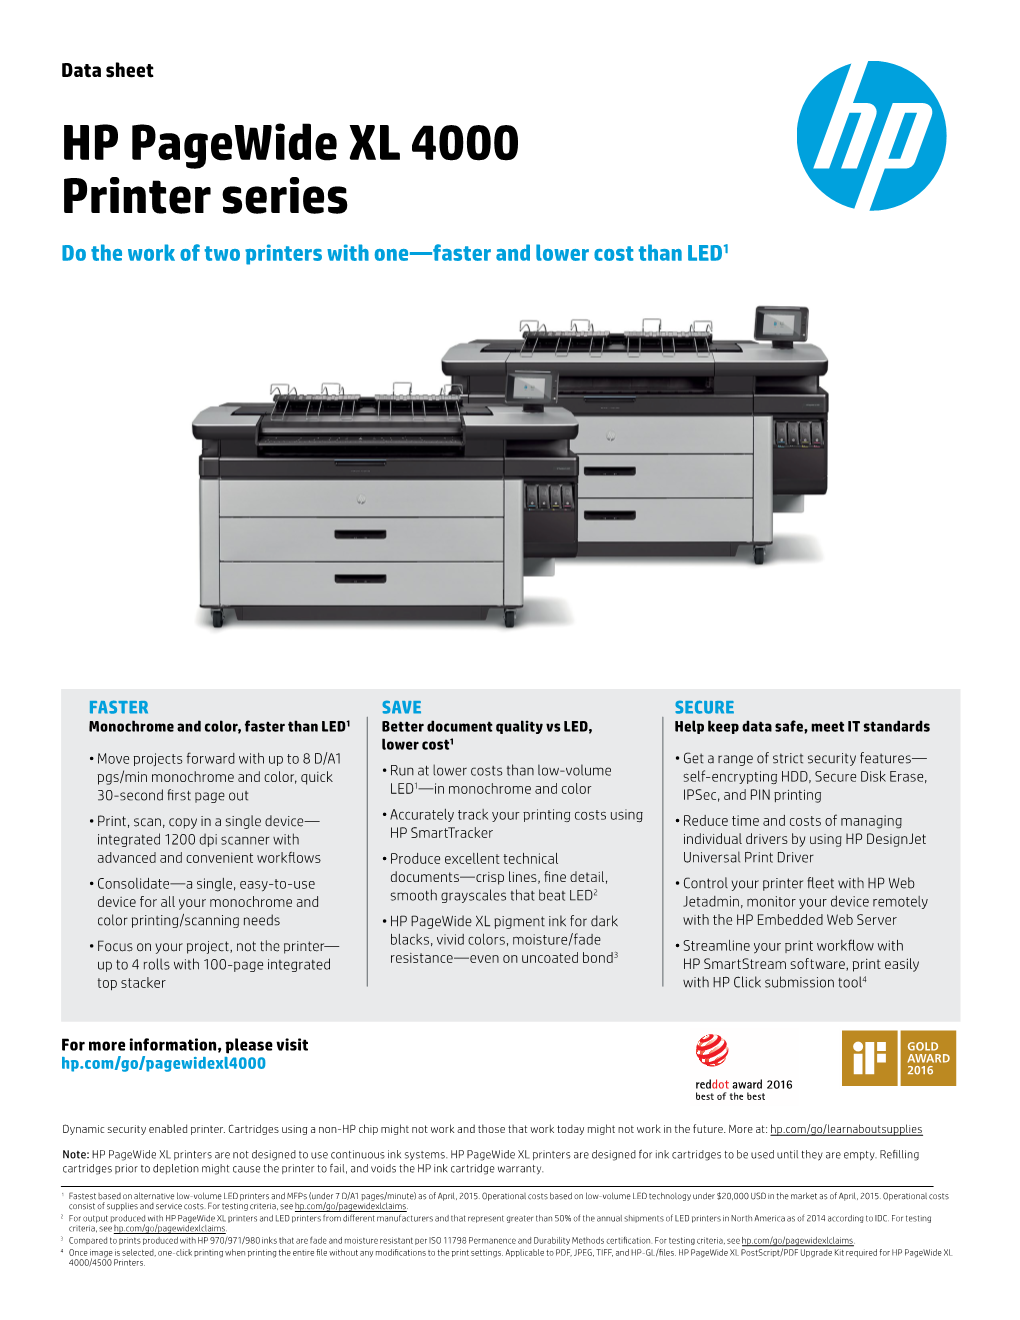 HP Pagewide XL 4000 Printer Series Do the Work of Two Printers with One—Faster and Lower Cost Than LED1